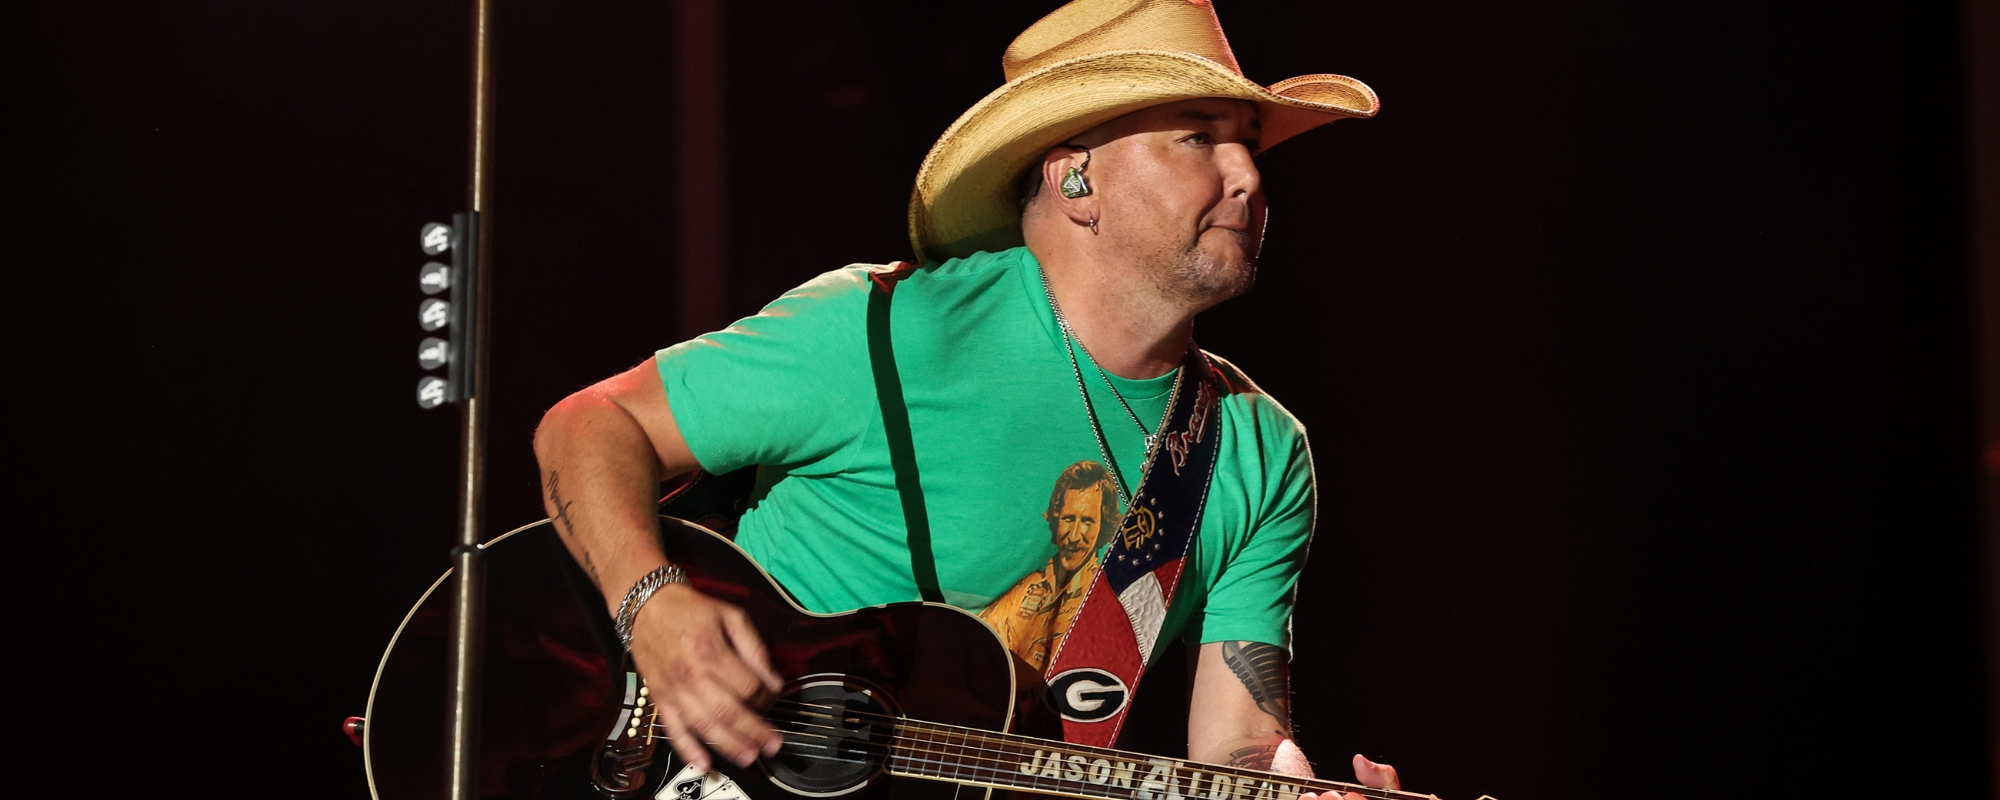 Why Did CMT Ban Jason Aldean’s “Try That in a Small Town”?